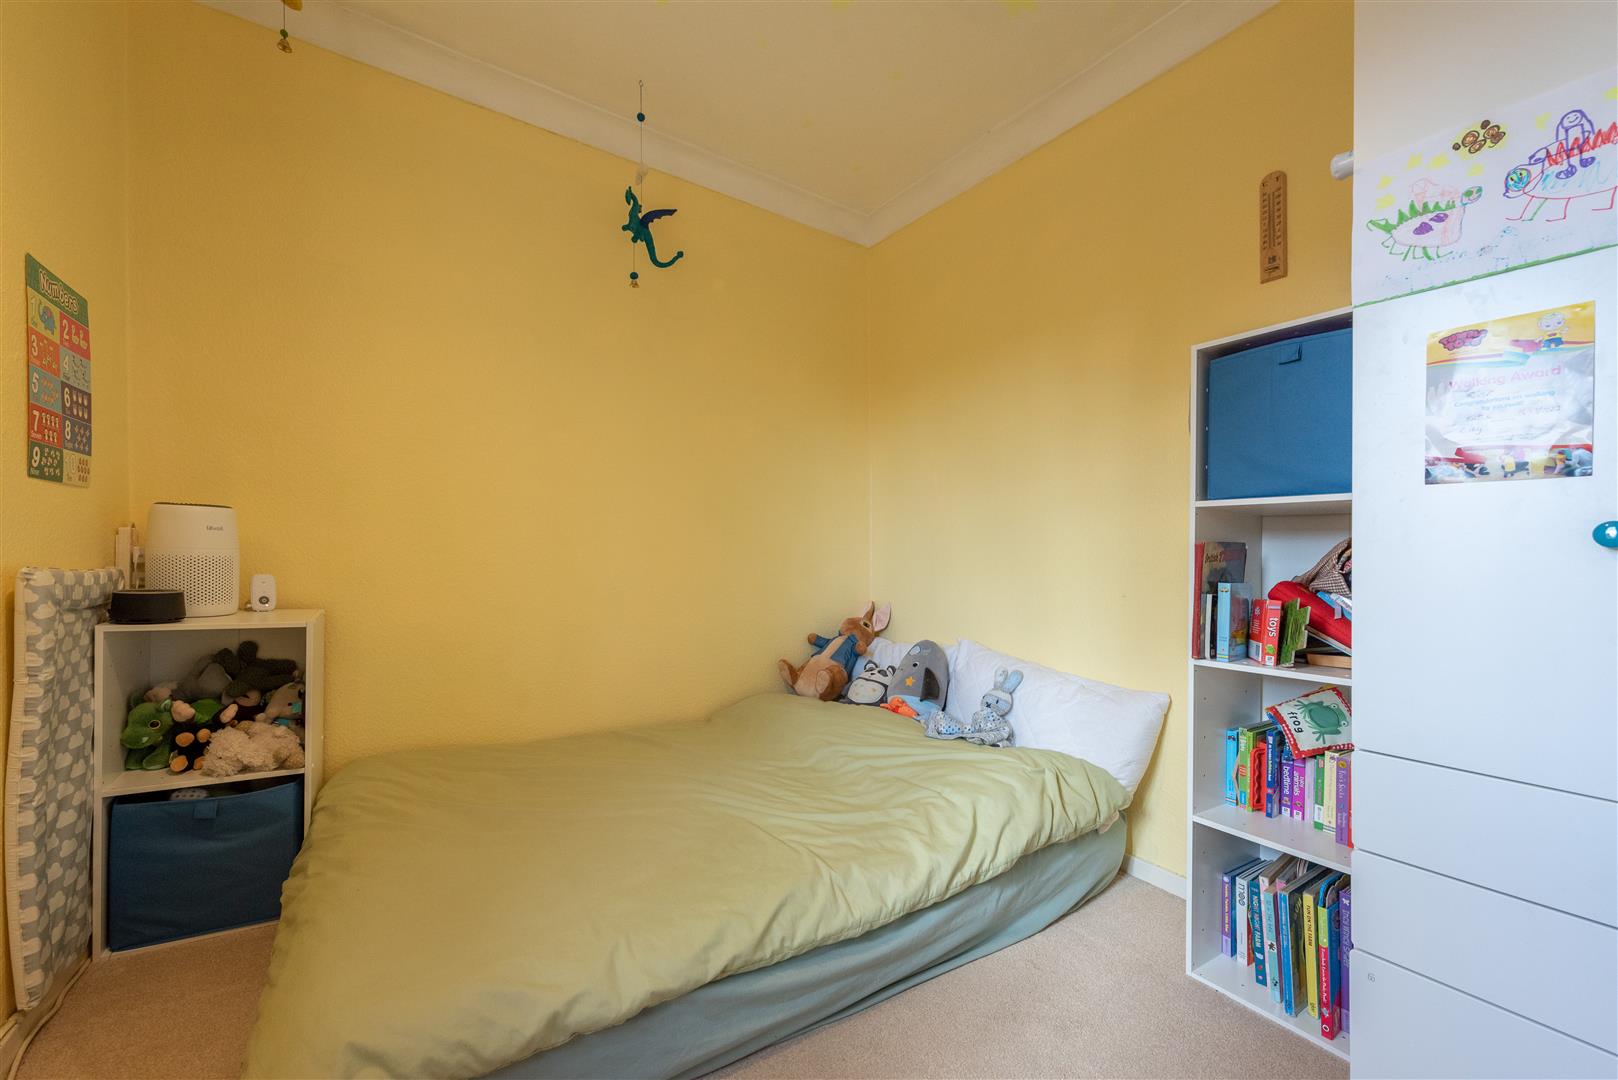 a room with toys and a bed for kids